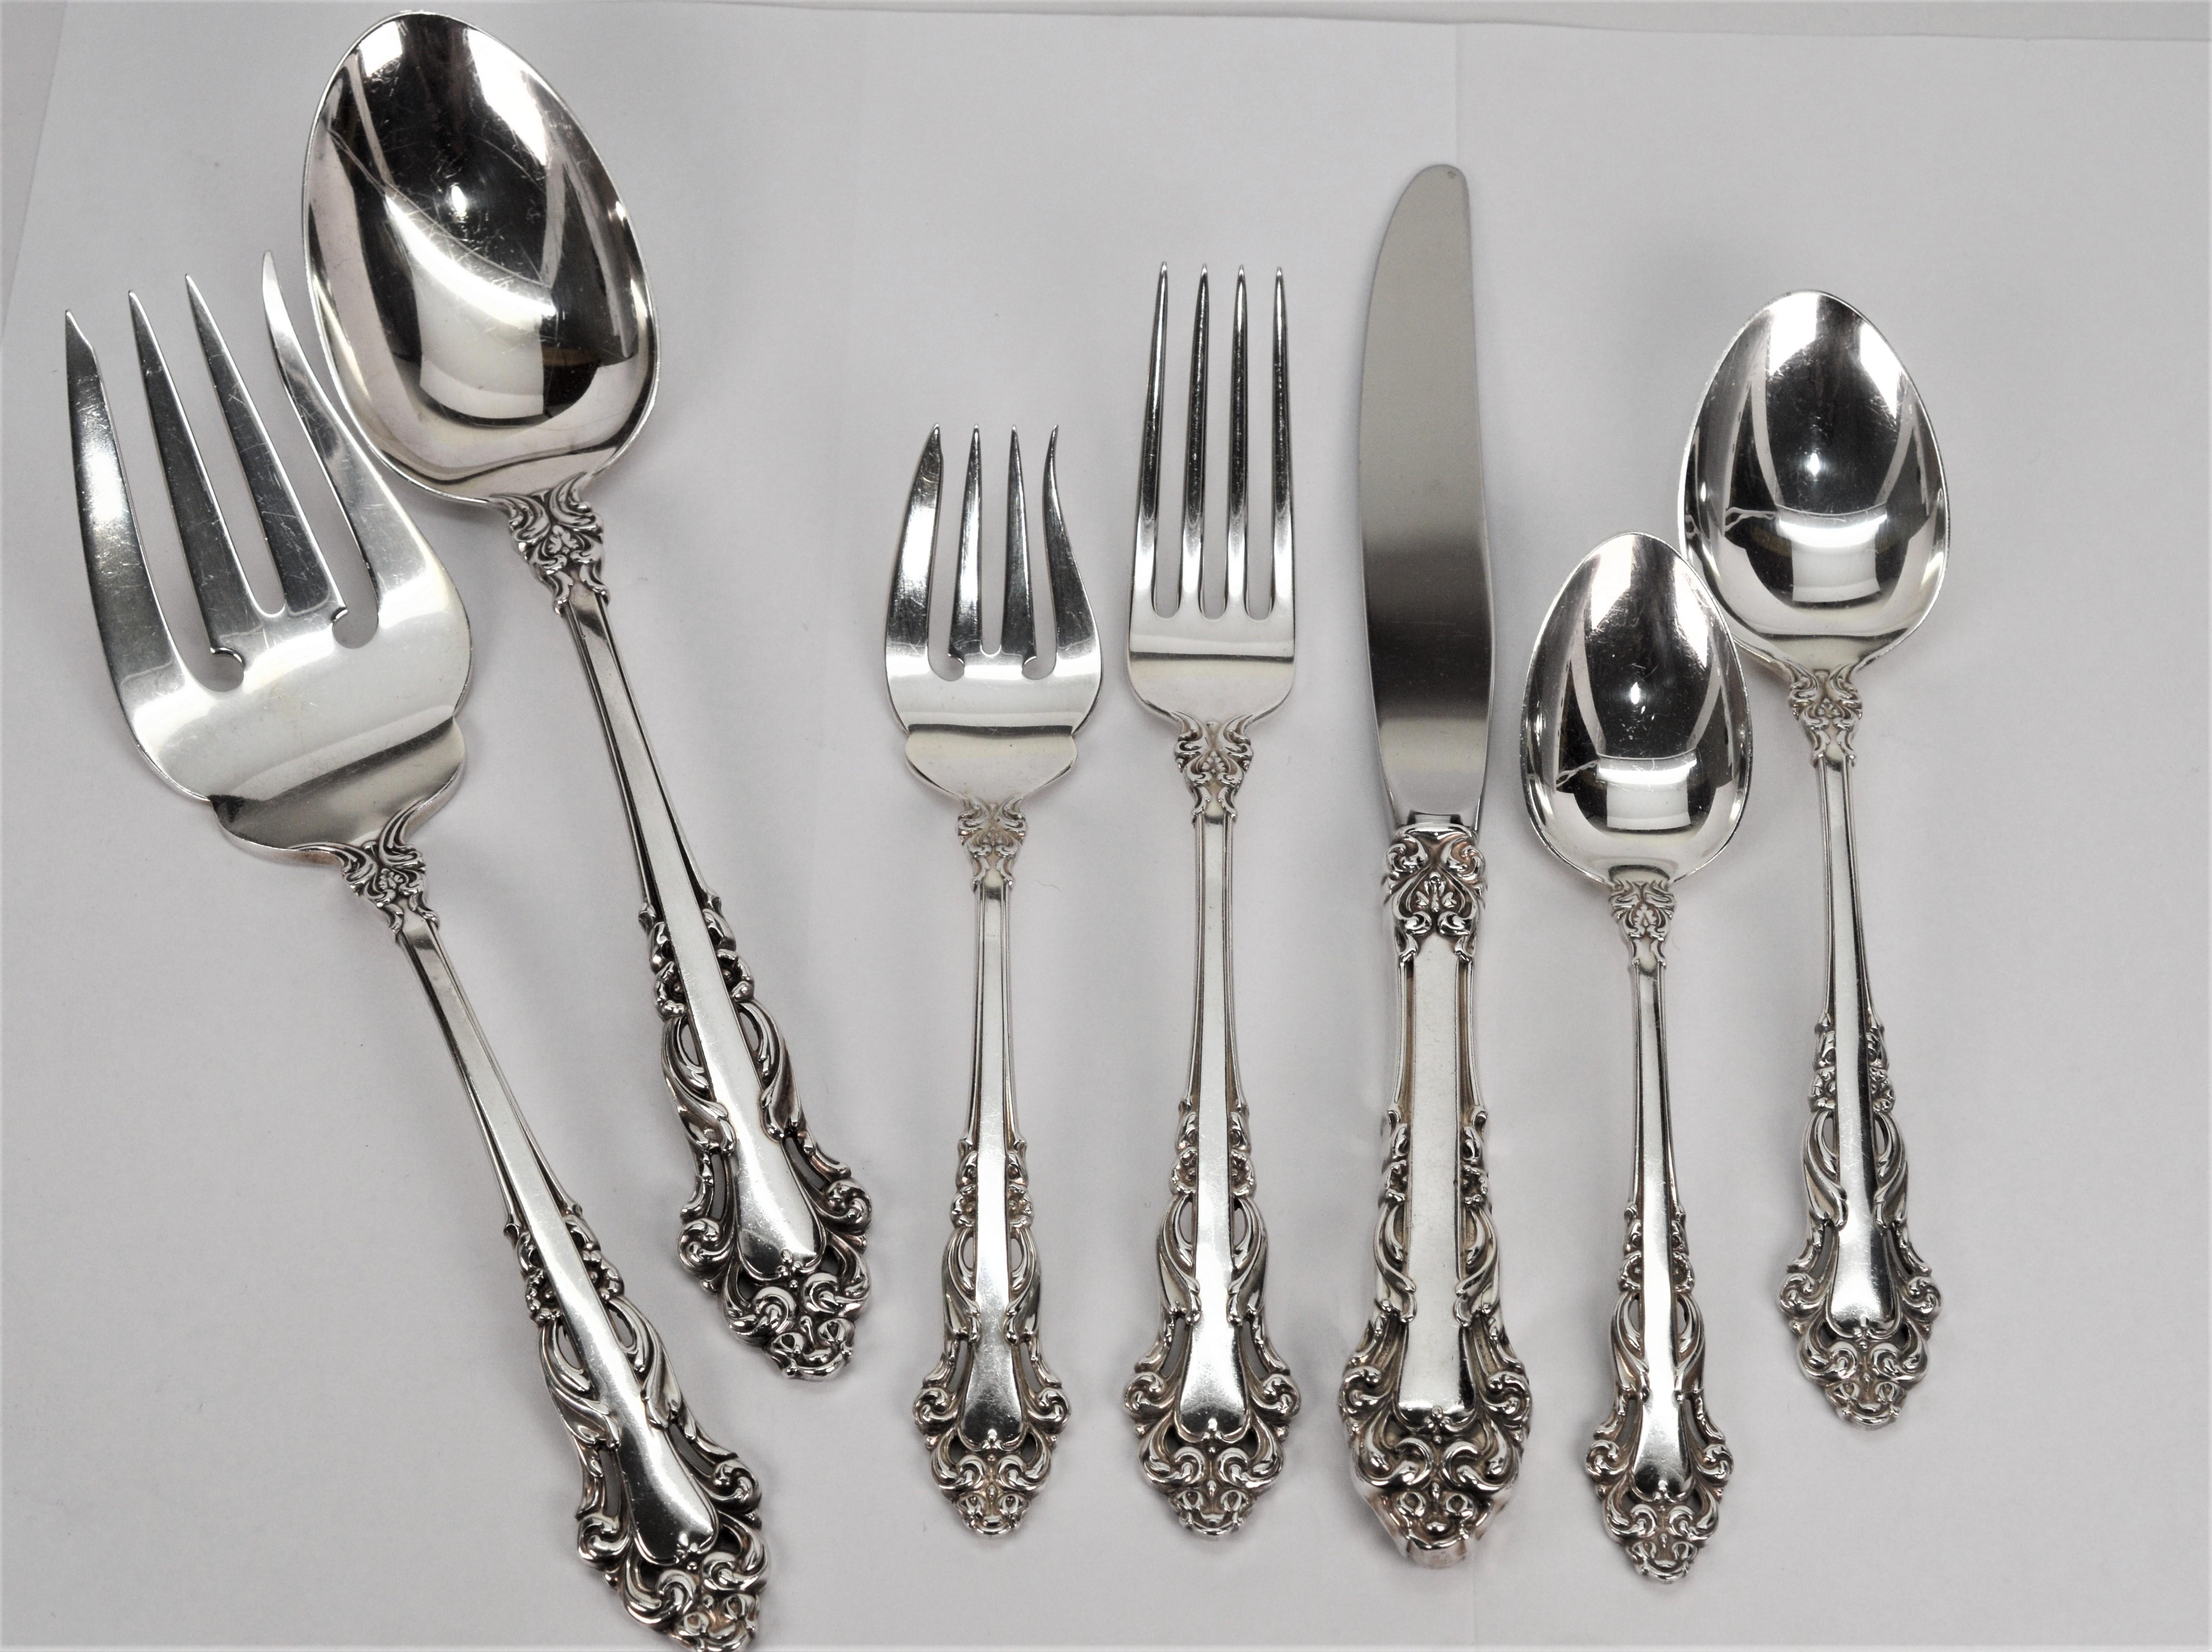 Set an elegant table with this Sterling Silver Flatware 5 Piece Place Setting for Twelve in Reed & Barton's Grande Renaissance Pattern. Matching bonus serving fork and serving spoon included. As per maker stamp on knife blade  